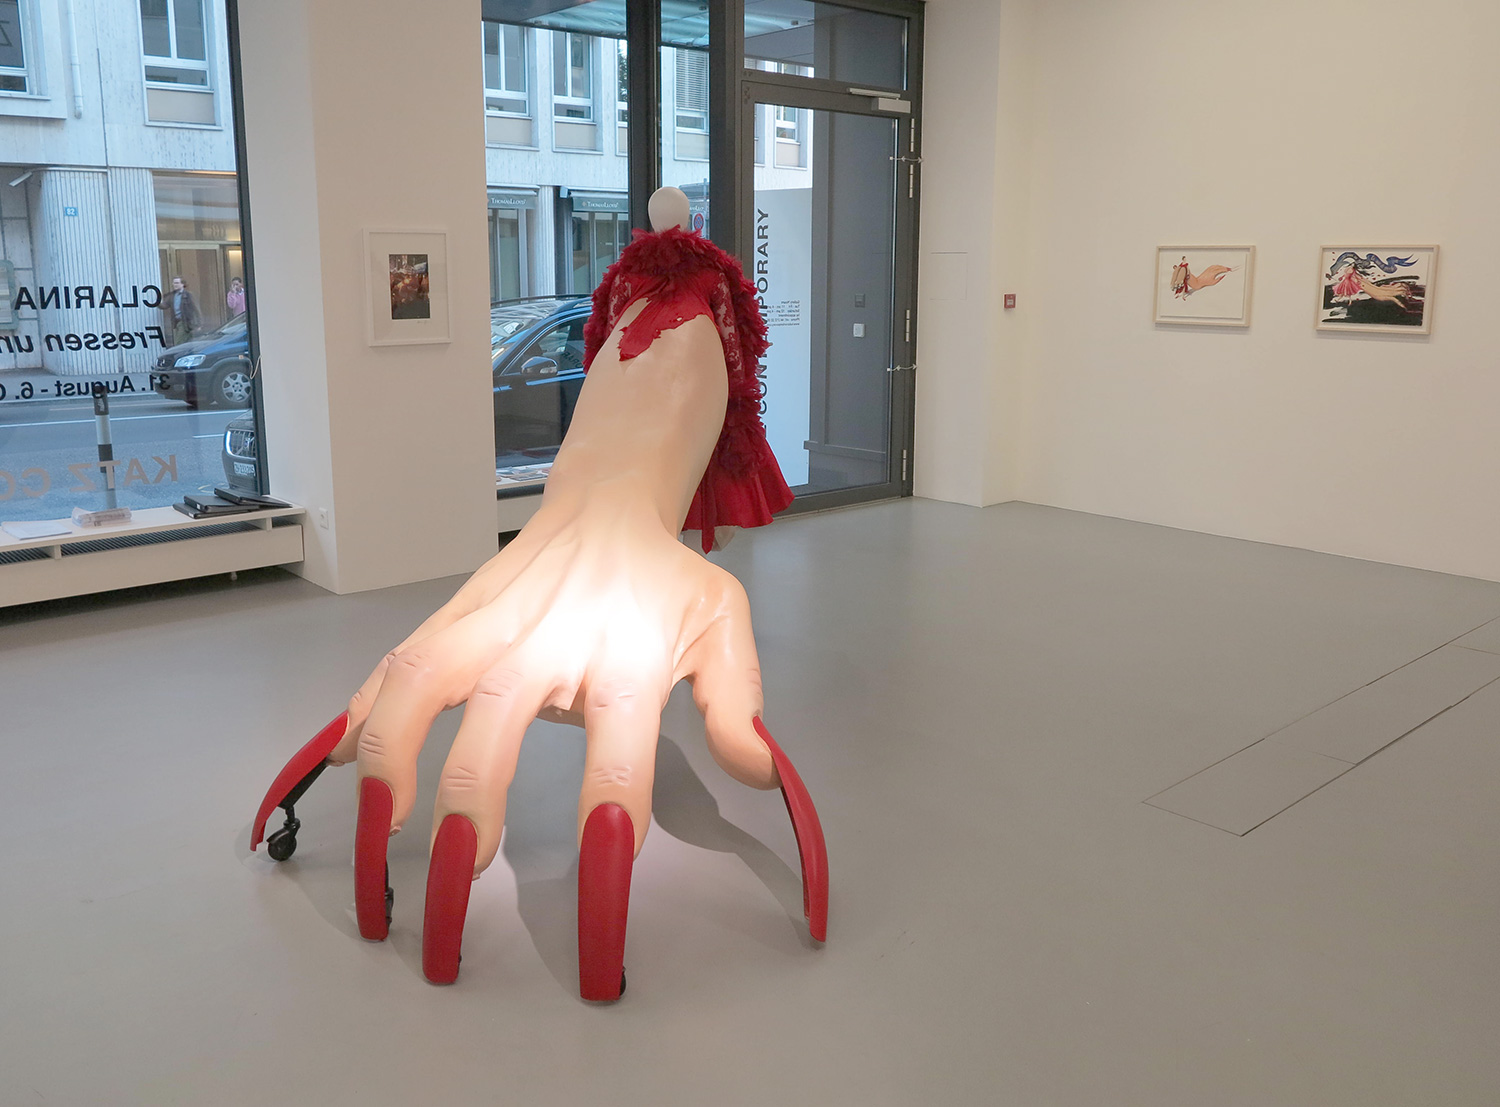 THE MUSETTA SCULPTURE DISPLAYED AT KATZ CONTEMPORARY GALLERY IN ZURICH